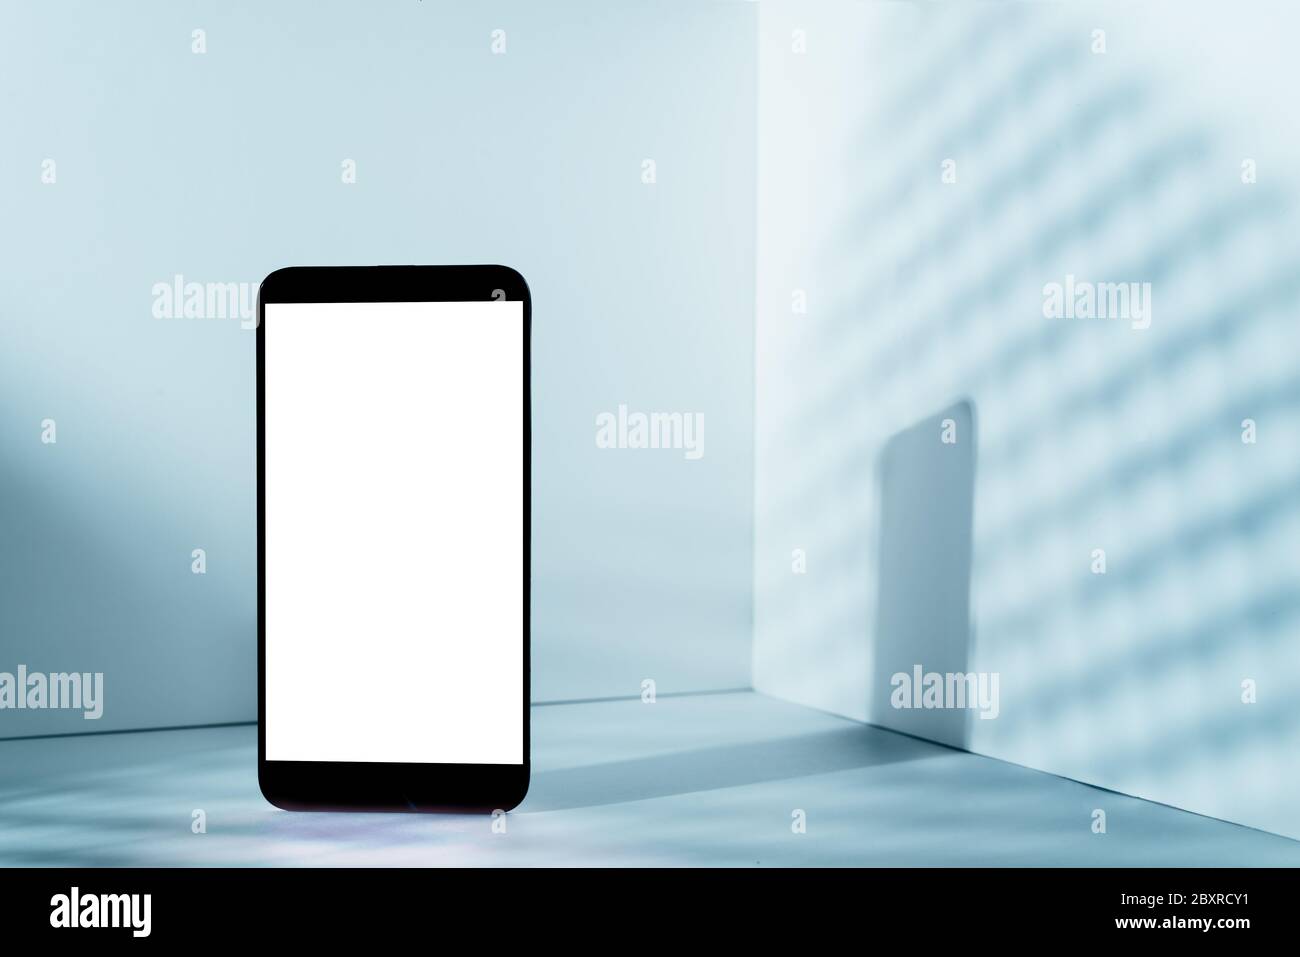 Minimalist modern smartphone mockup for presentation, in perspective in front of the corner angle of the wall, with overlapping shadows and blue gradi Stock Photo